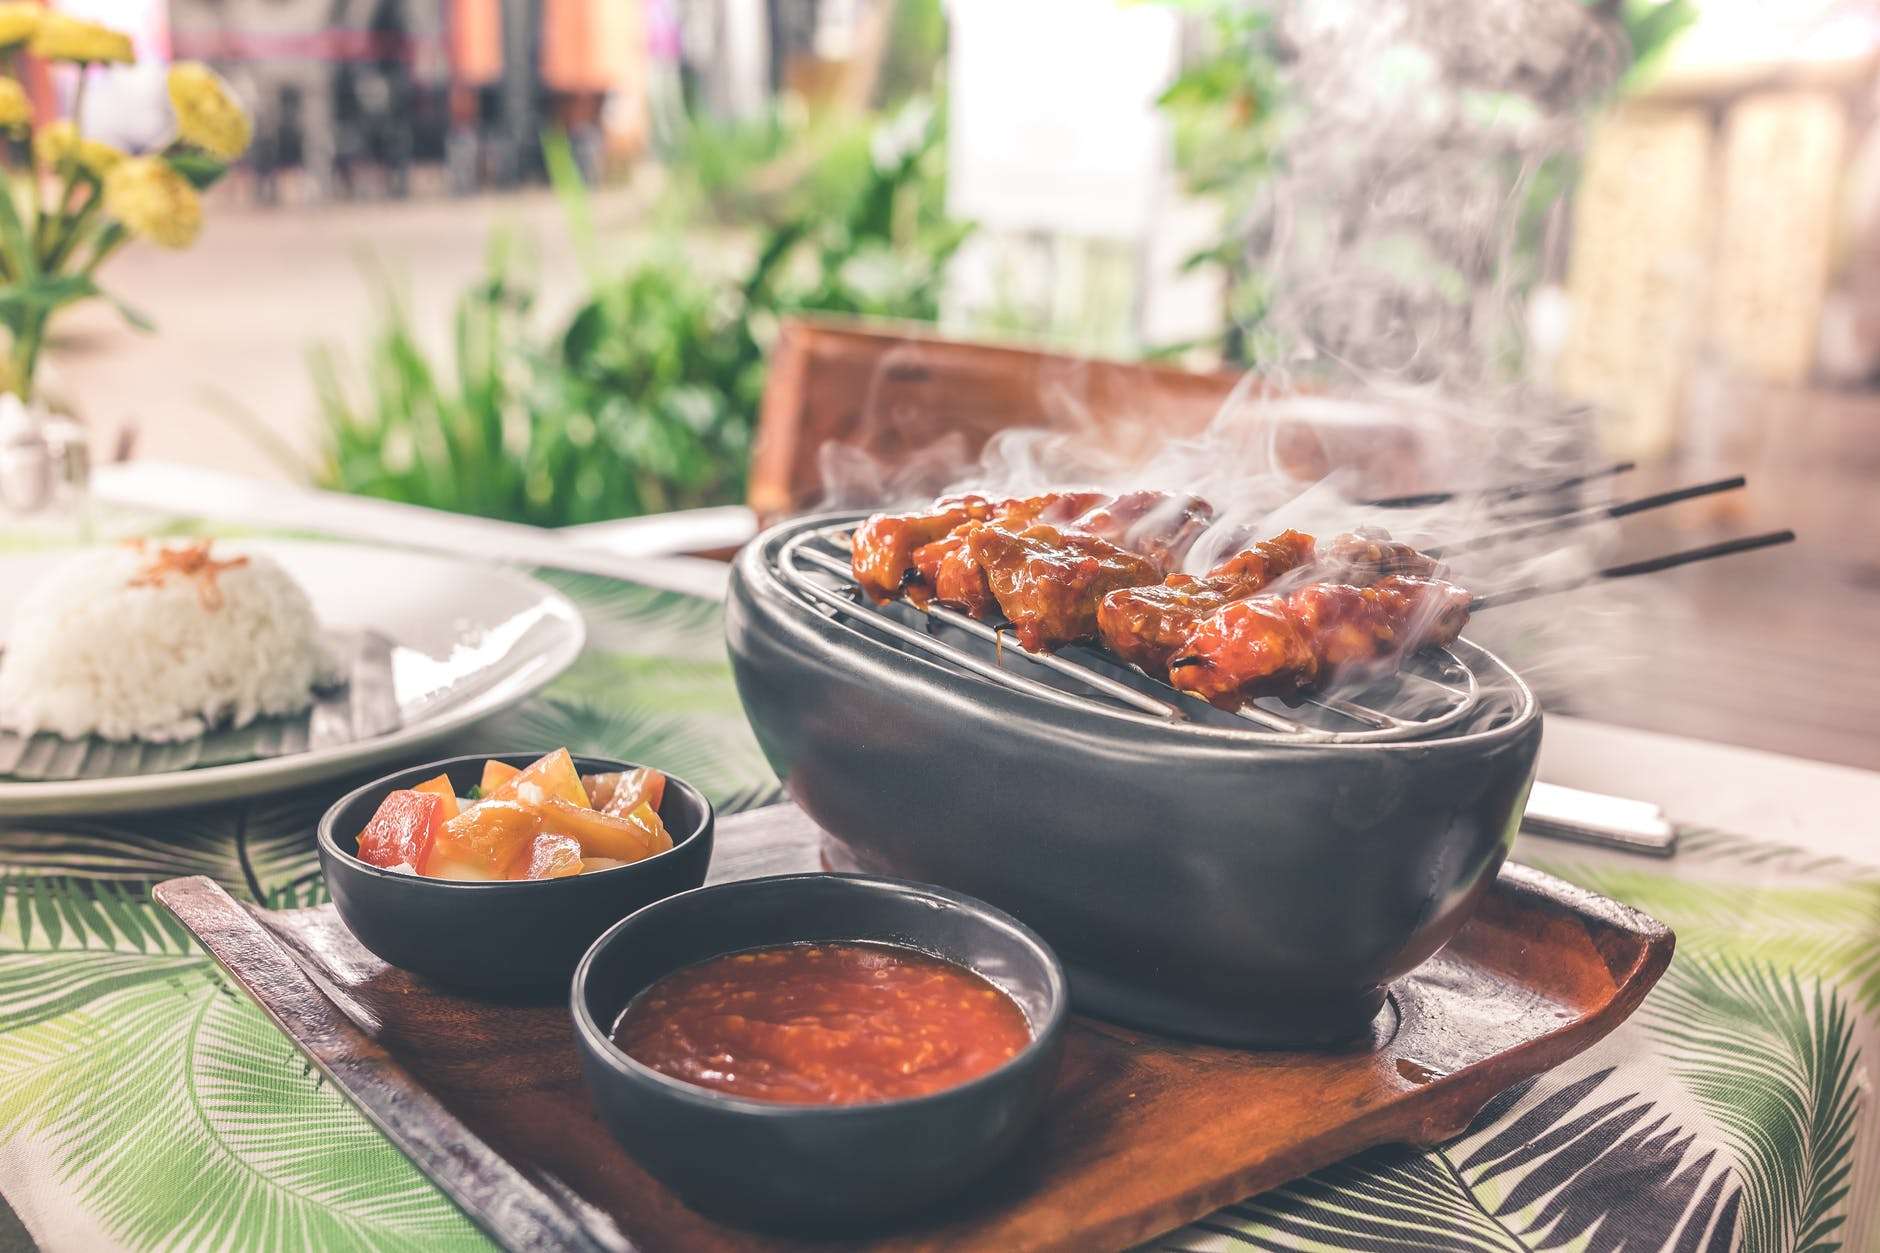 Electric Barbeque Grills To Prepare Smoke-Free And Scrumptious Food At Home  | Most Searched Products - Times of India